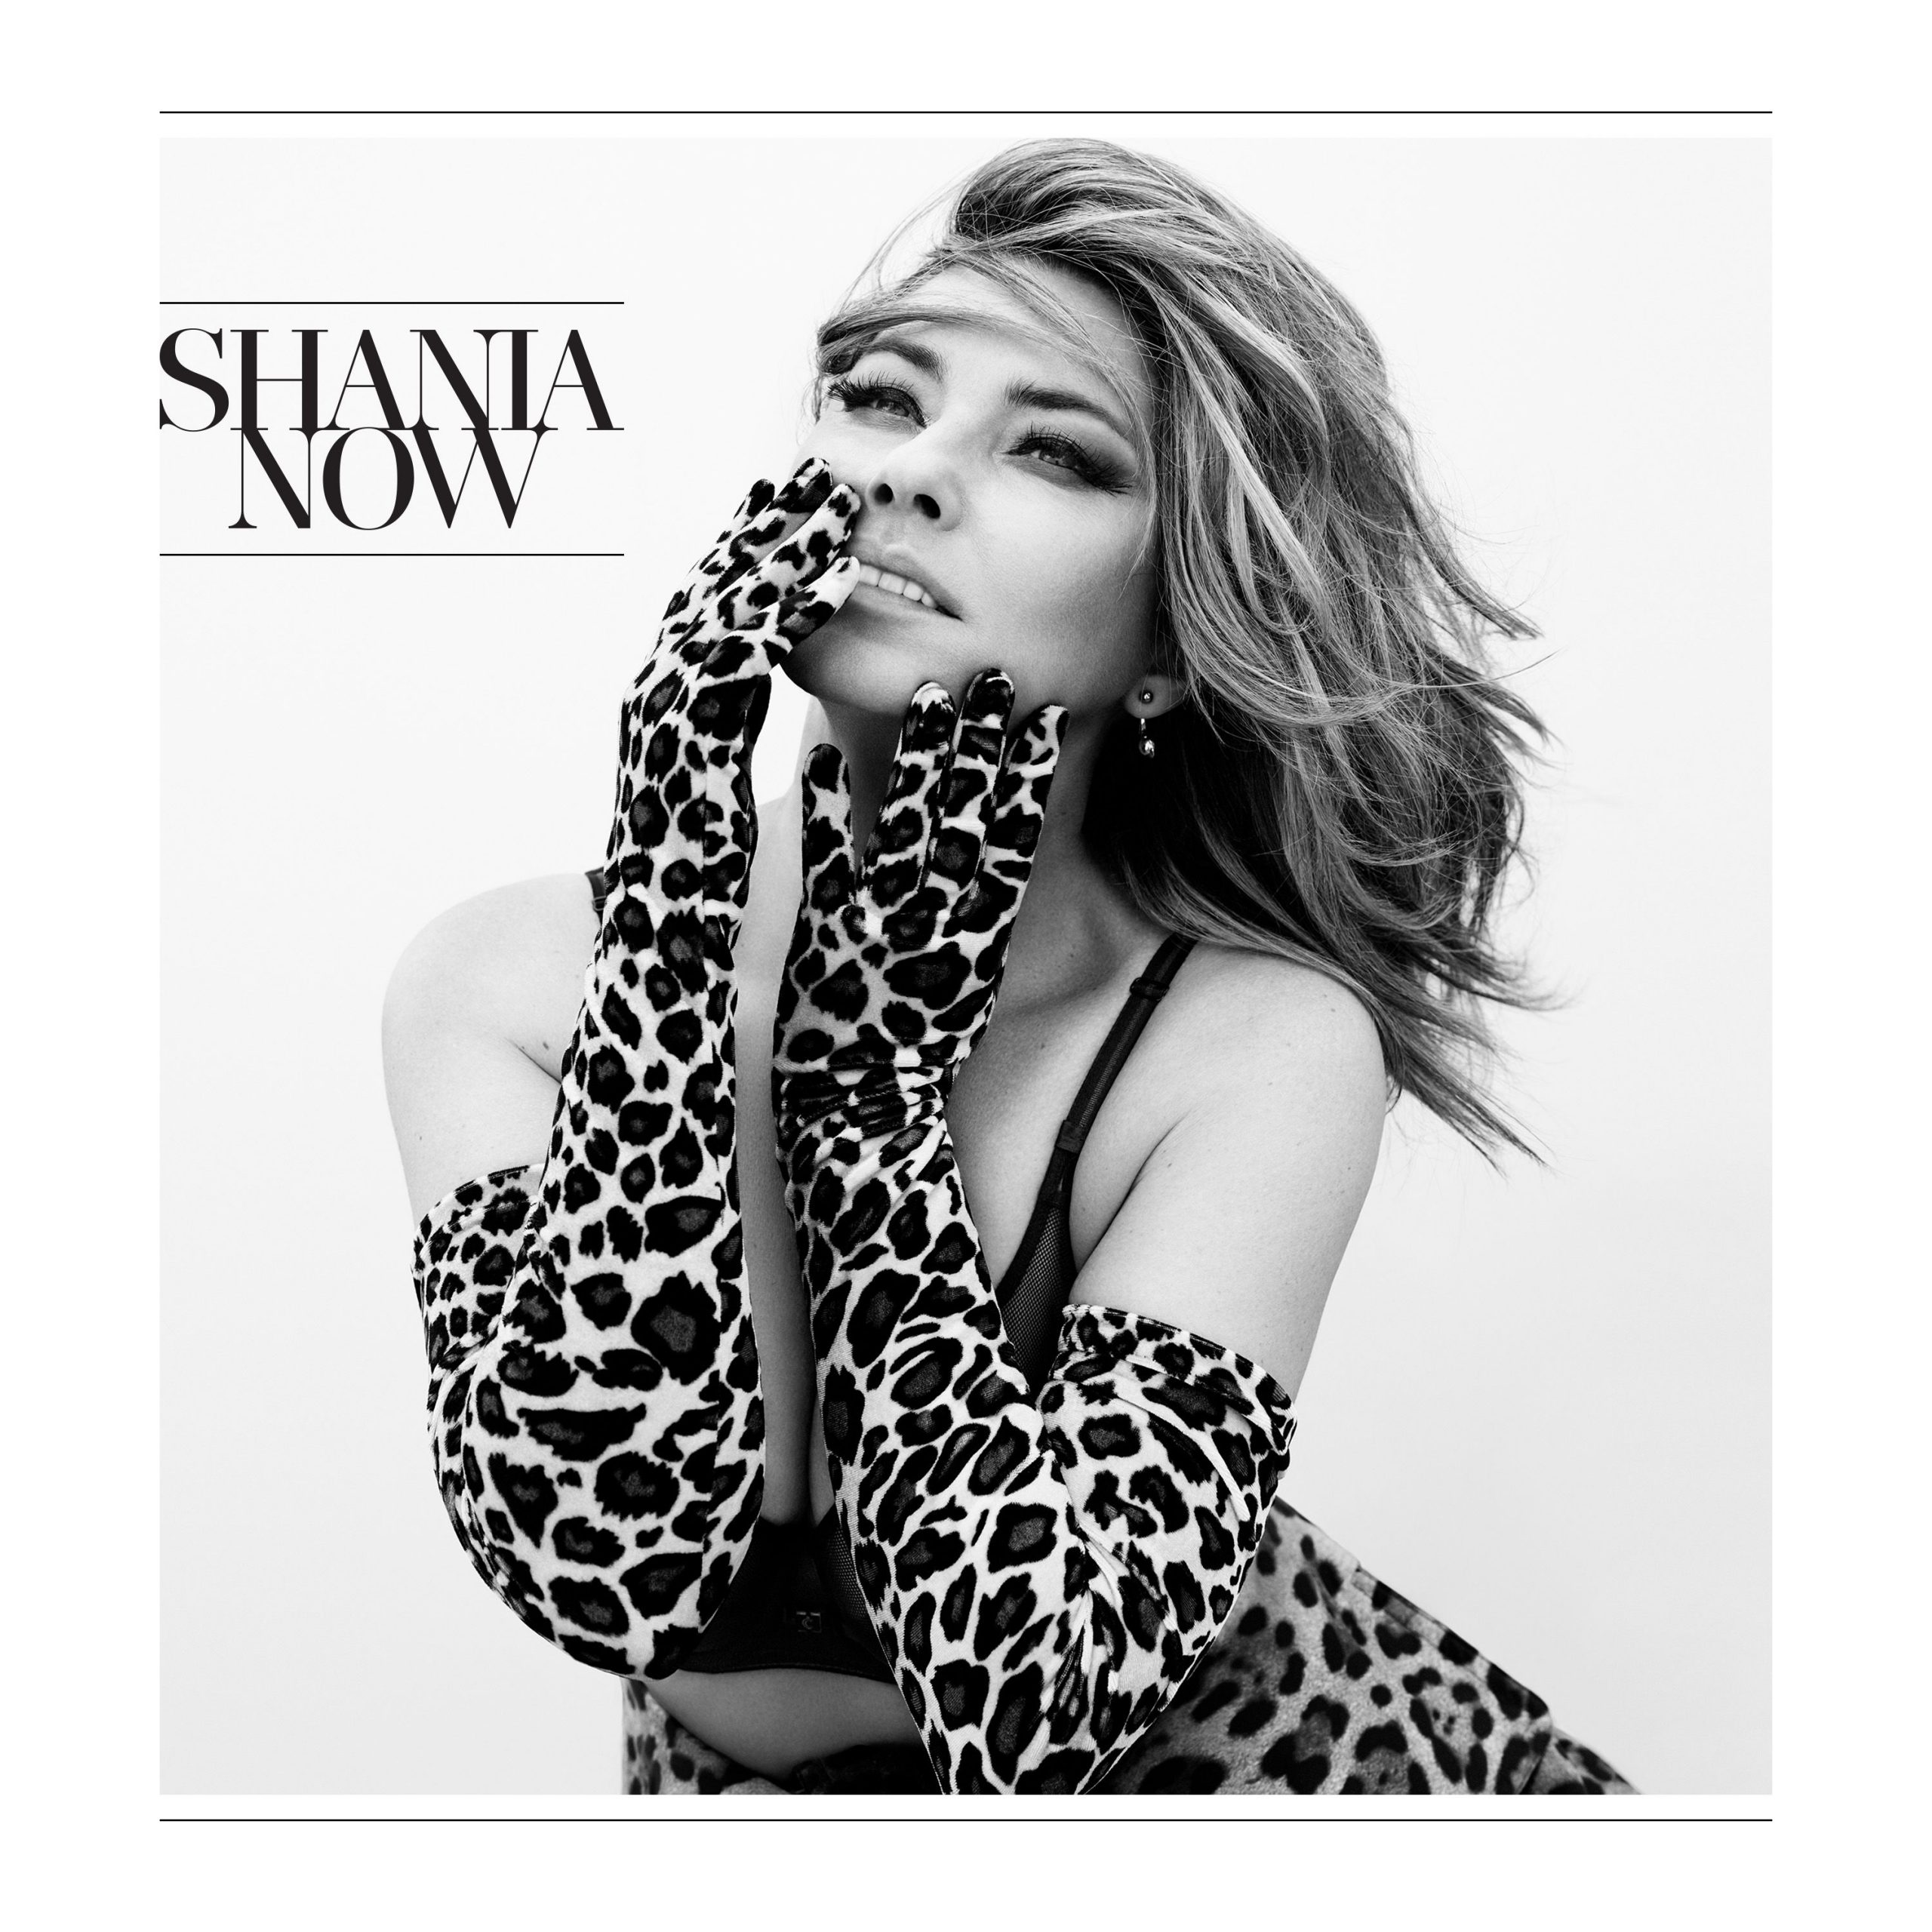 SUPERSTAR SHANIA TWAIN GEARS UP TO RELEASE BRAND NEW ALBUM NOW THIS FRIDAY SEPT. 29